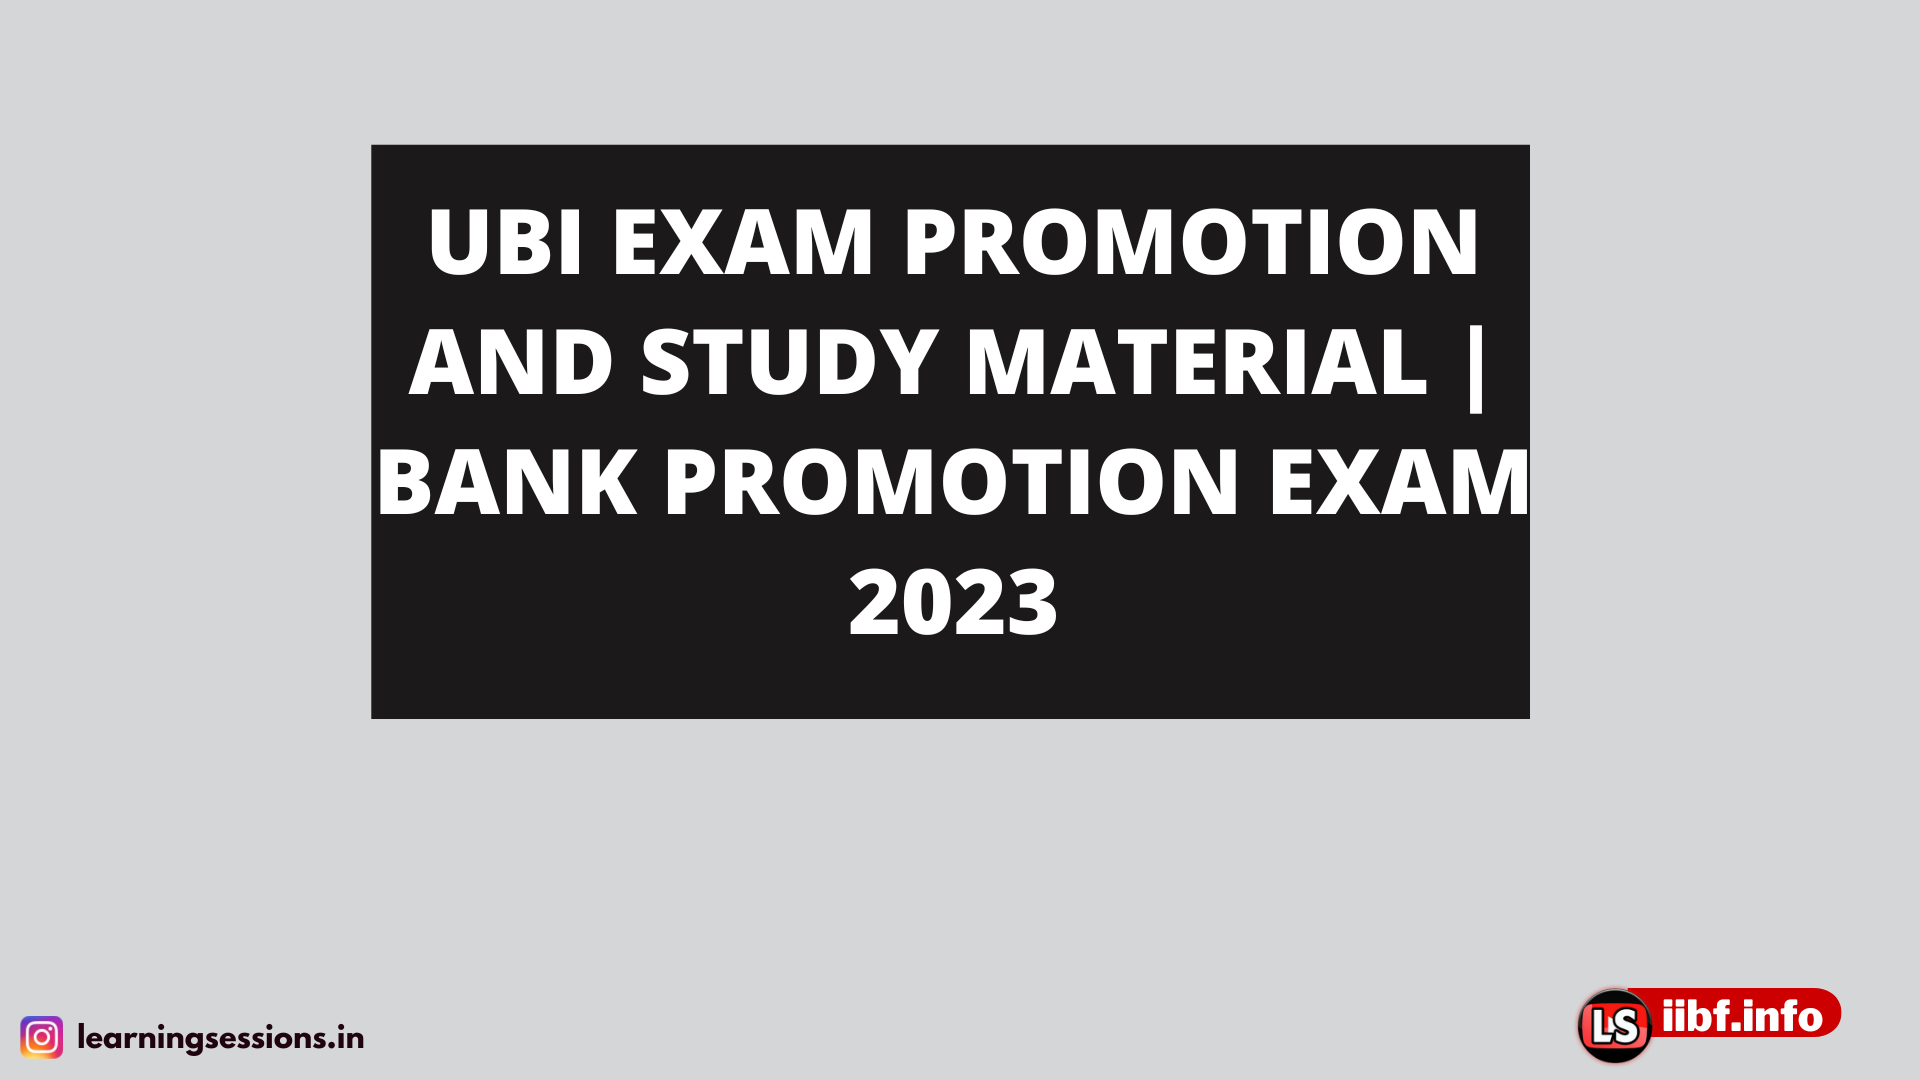 UBI EXAM PROMOTION AND STUDY MATERIAL | BANK PROMOTION EXAM 2023